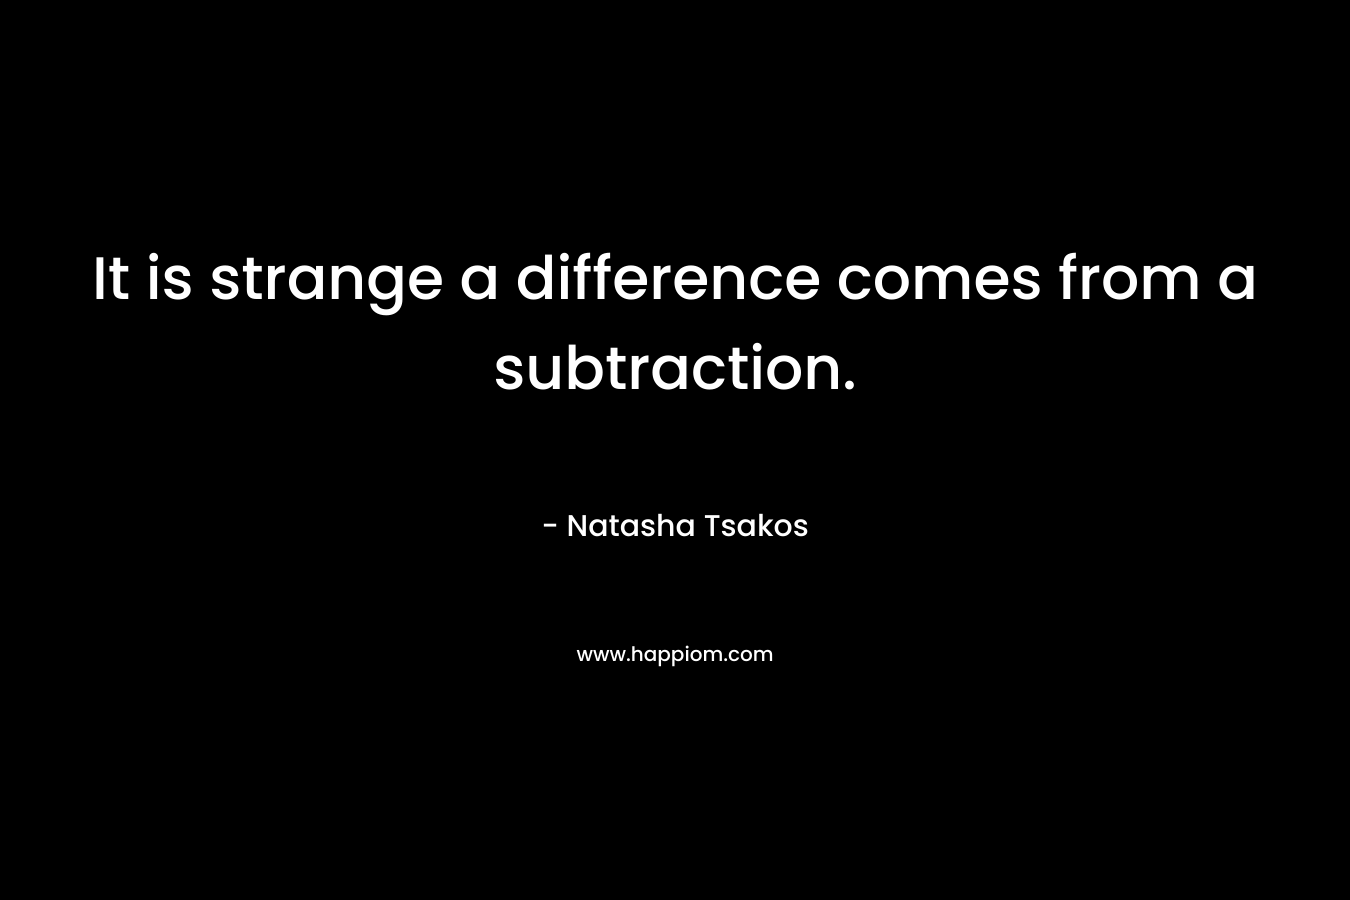 It is strange a difference comes from a subtraction.